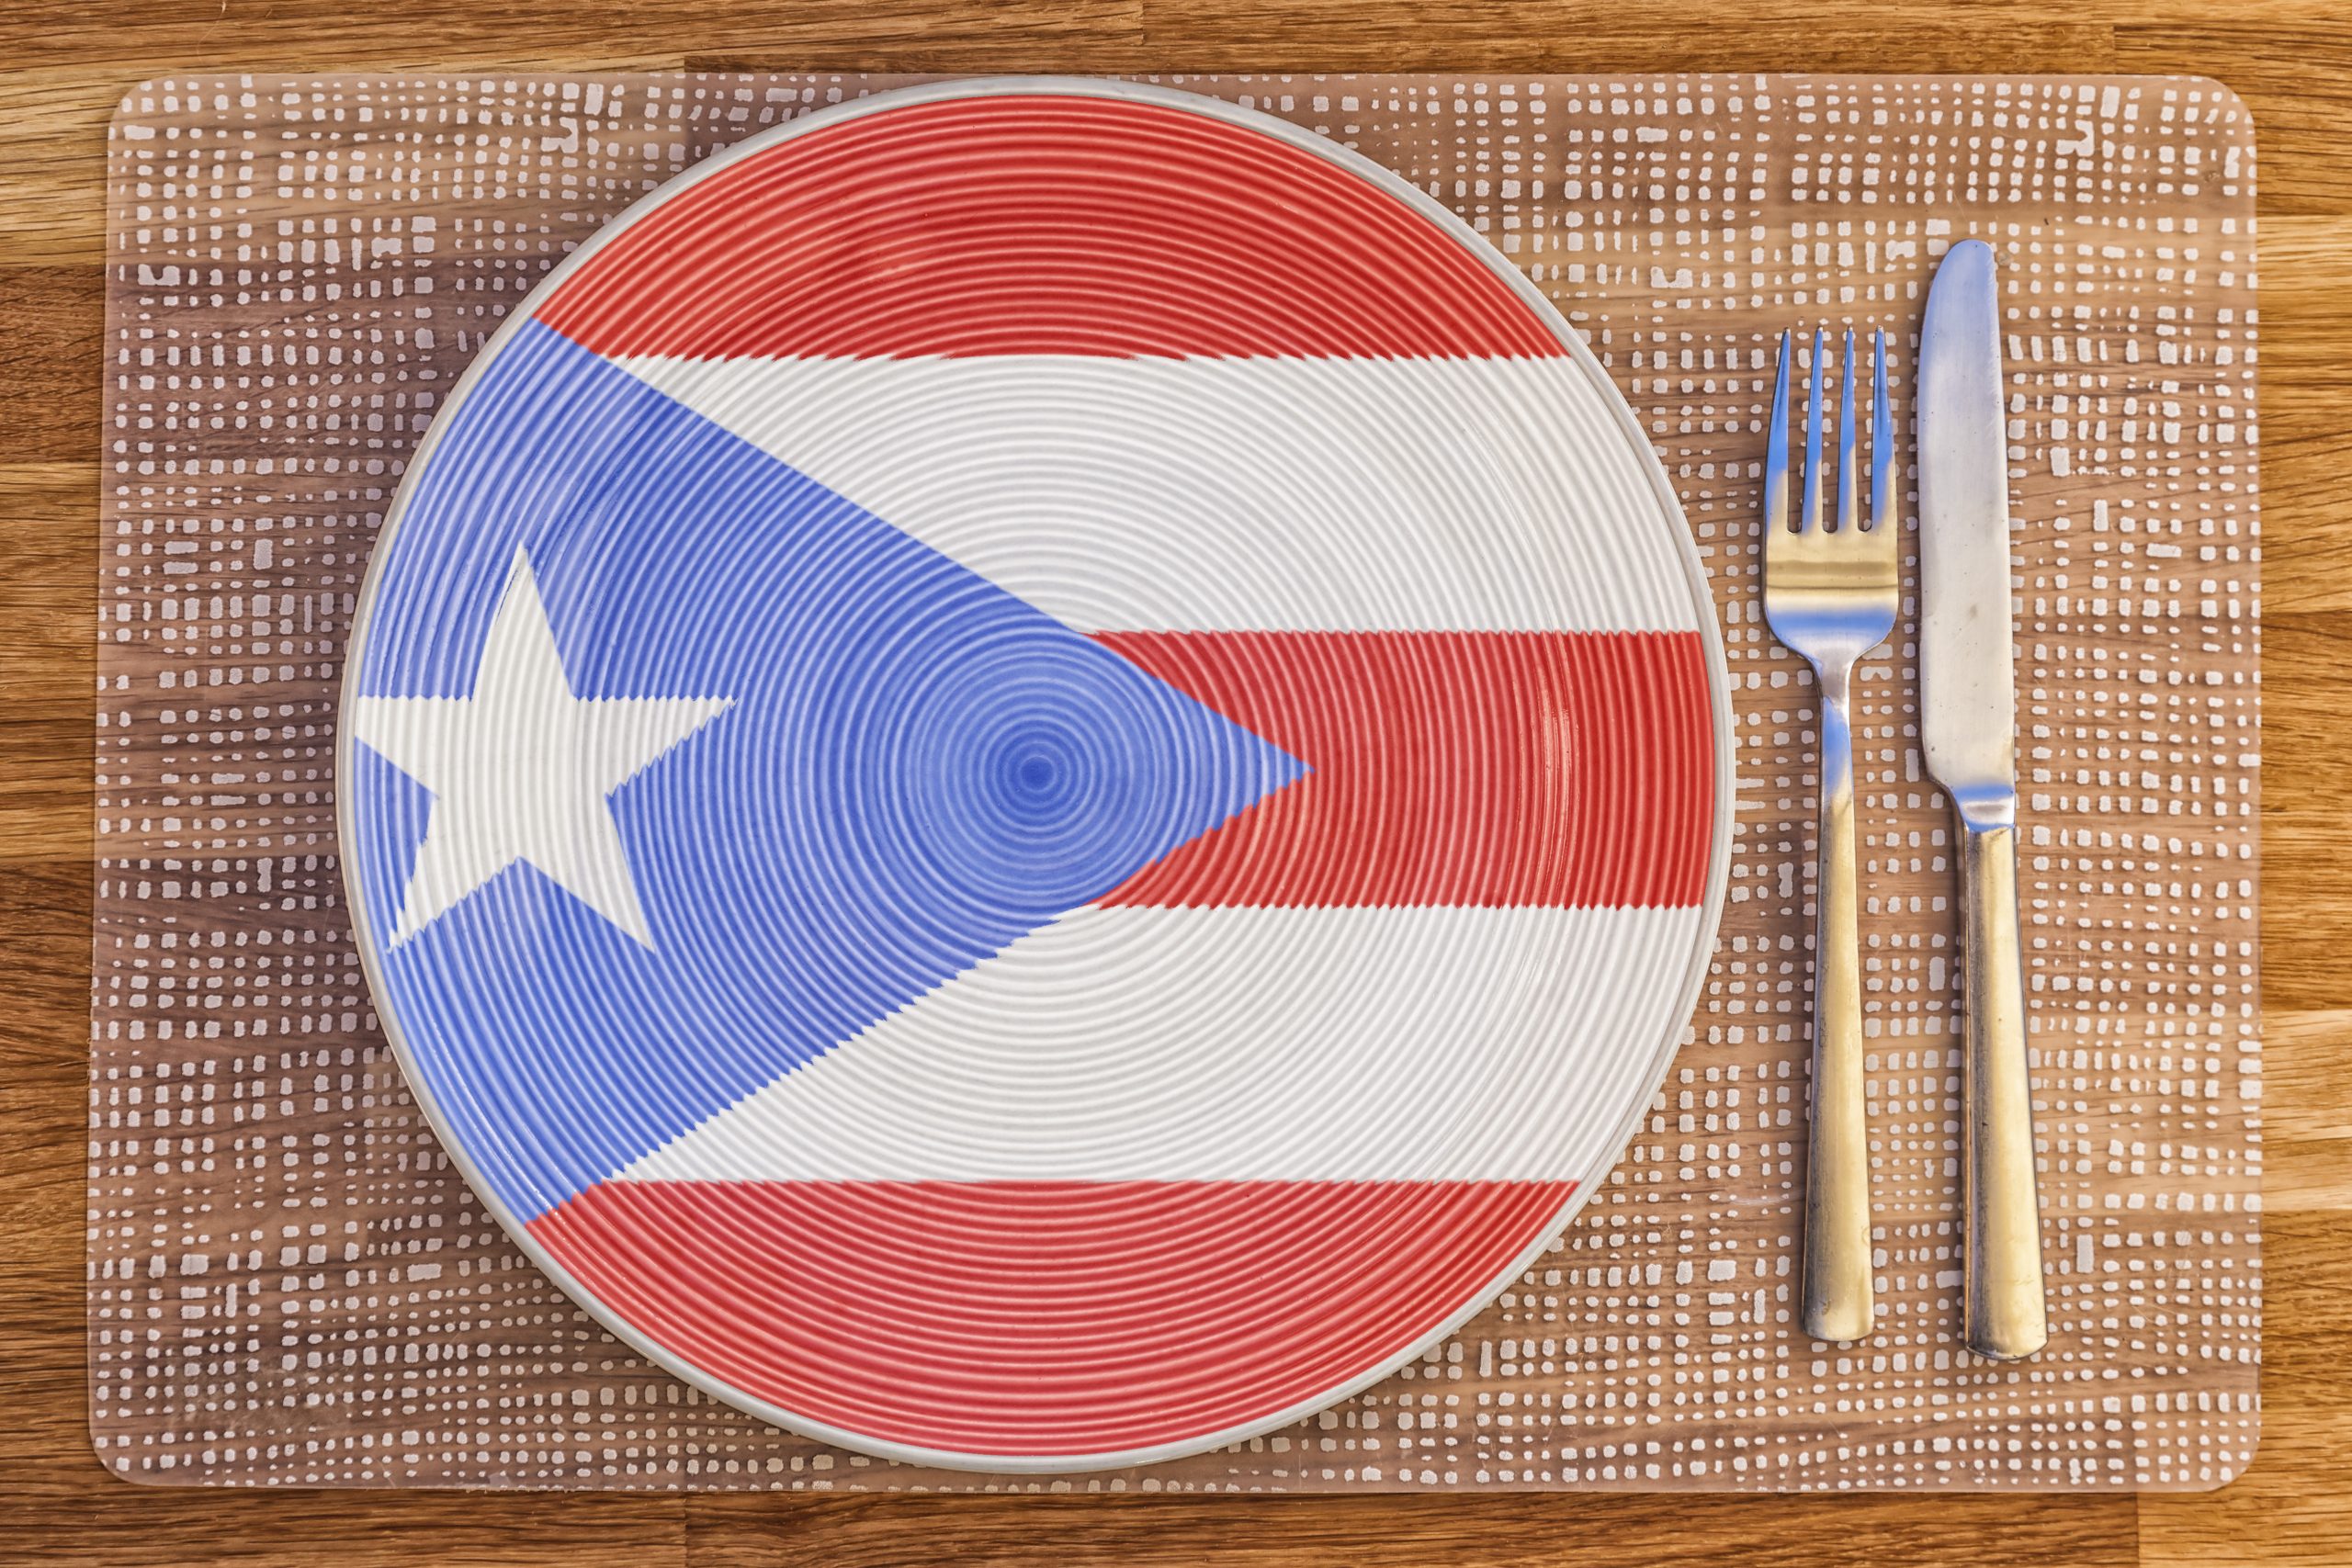 A plate painted with the Puerto Rican flag, next to a fork and knife